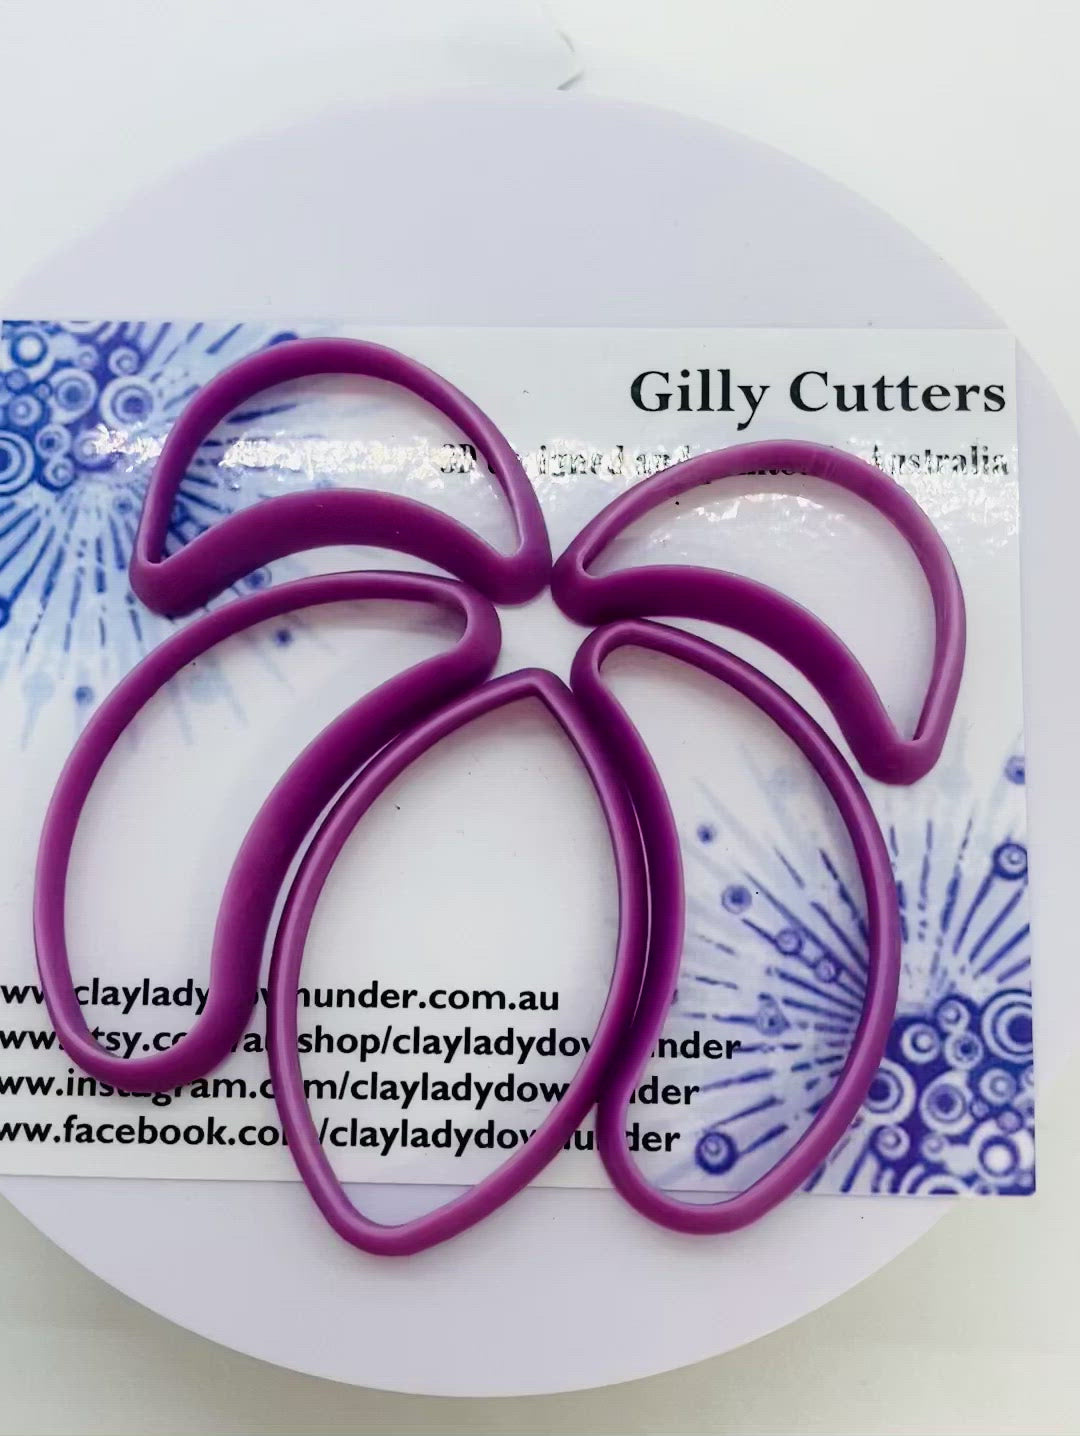 Resin Polymer clay cutters | Gilly cutters Eve | Clay Tools | Clay Supplies